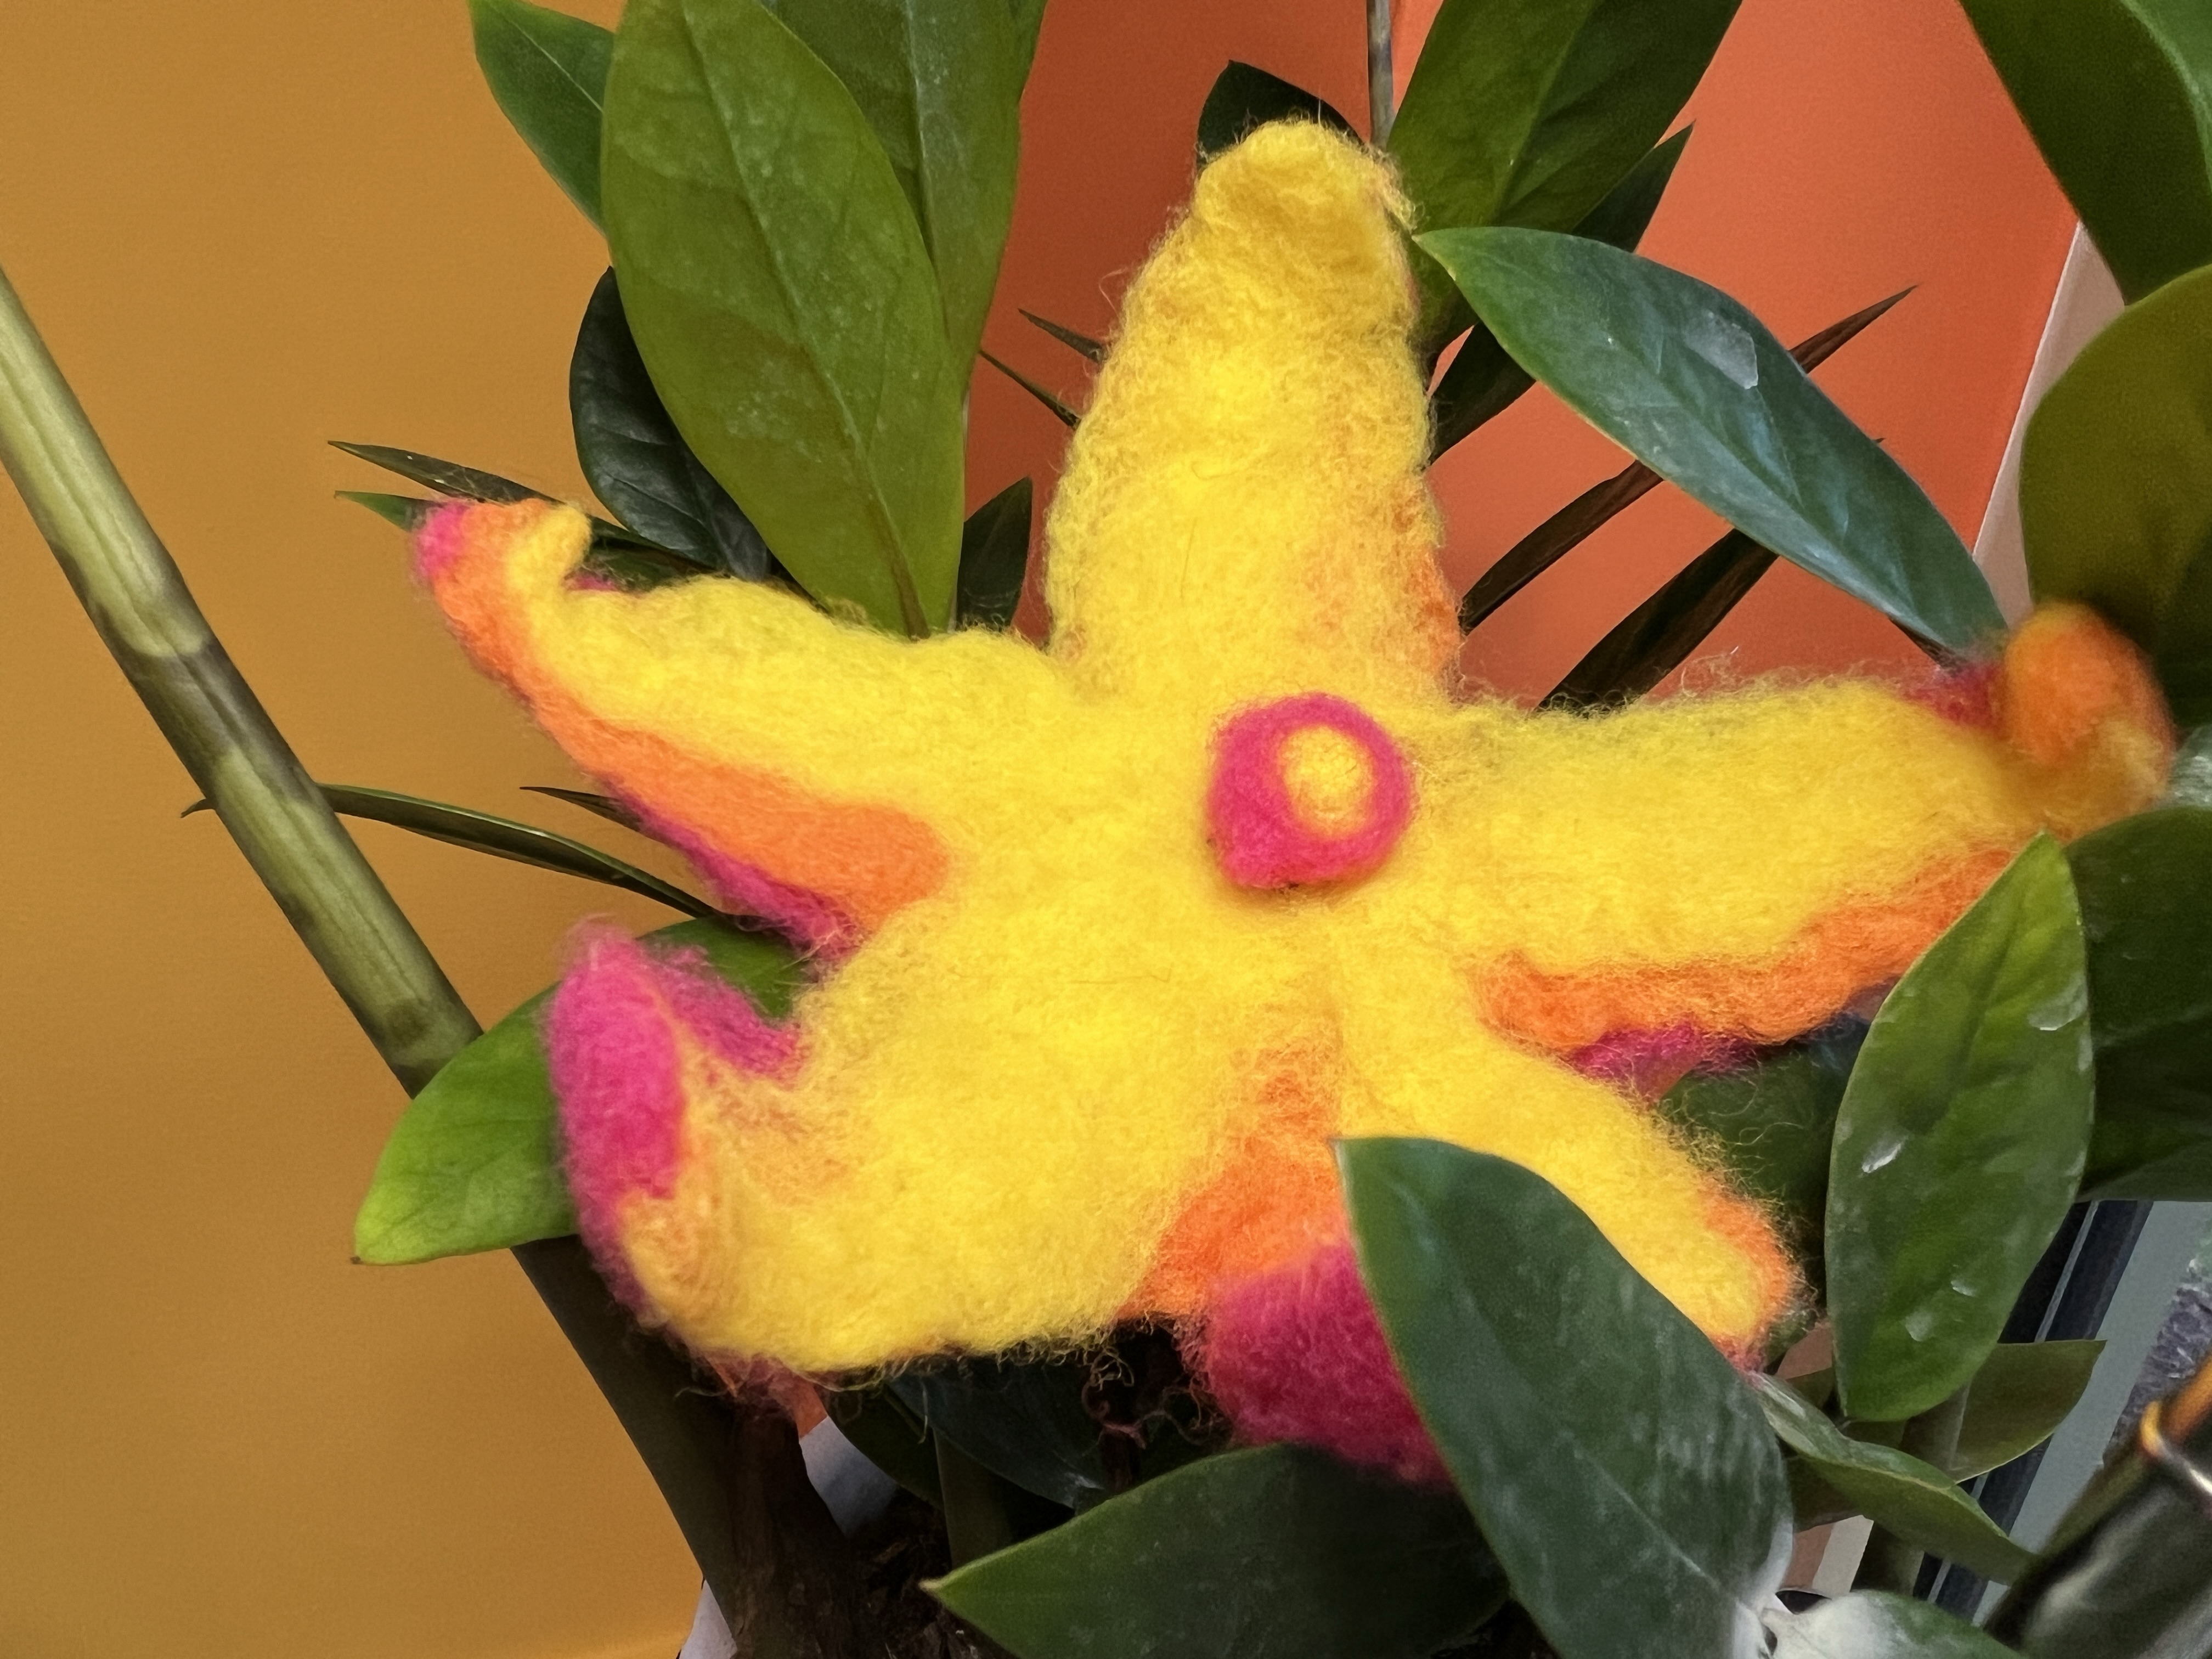 Yellow star shaped flower with pink underneath and dot in center on plant leaves with a yellow and orange background